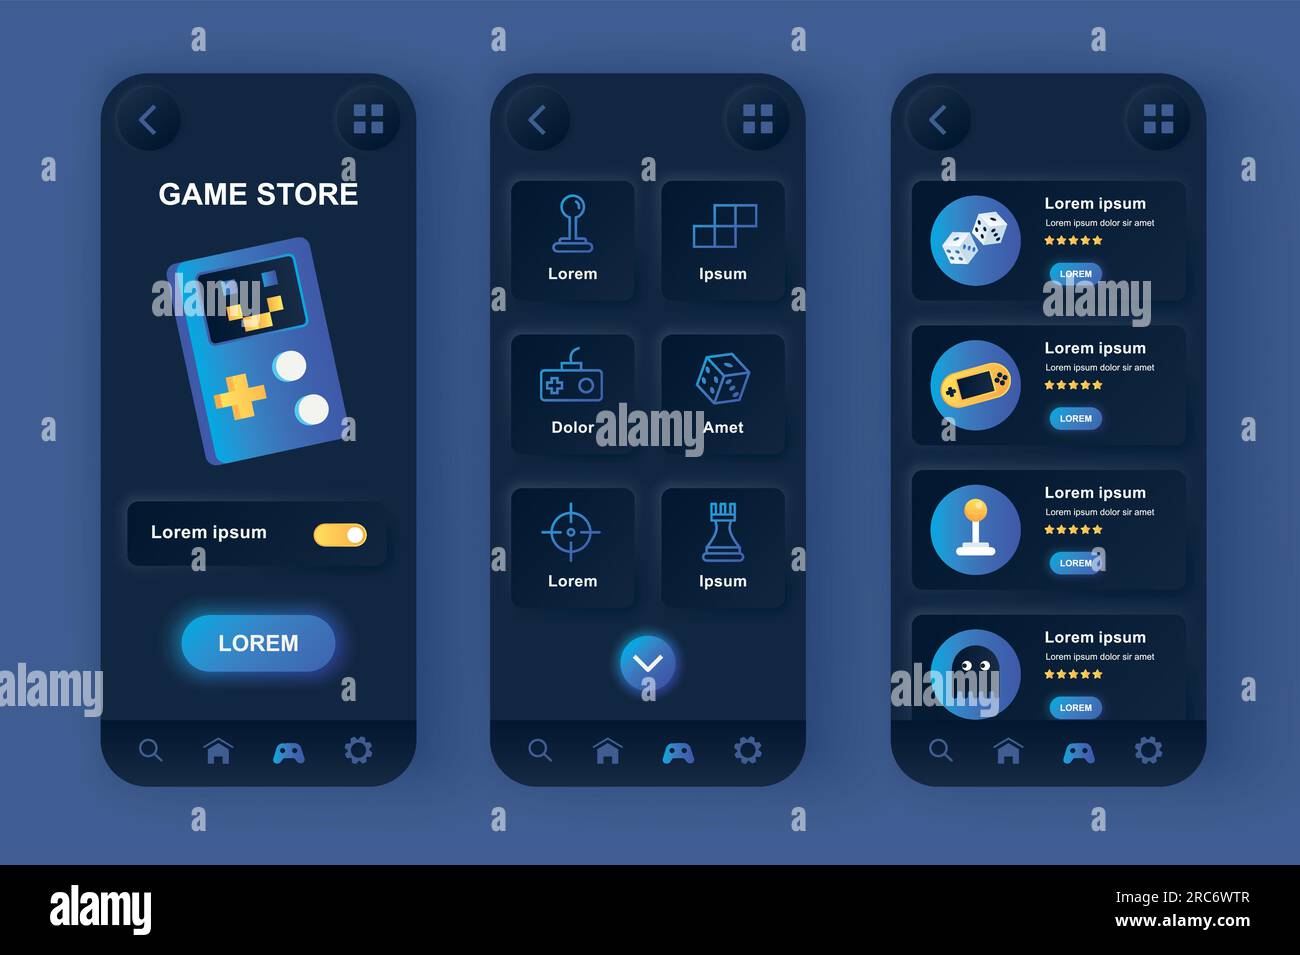 Game Store UI Kit on Yellow Images Creative Store